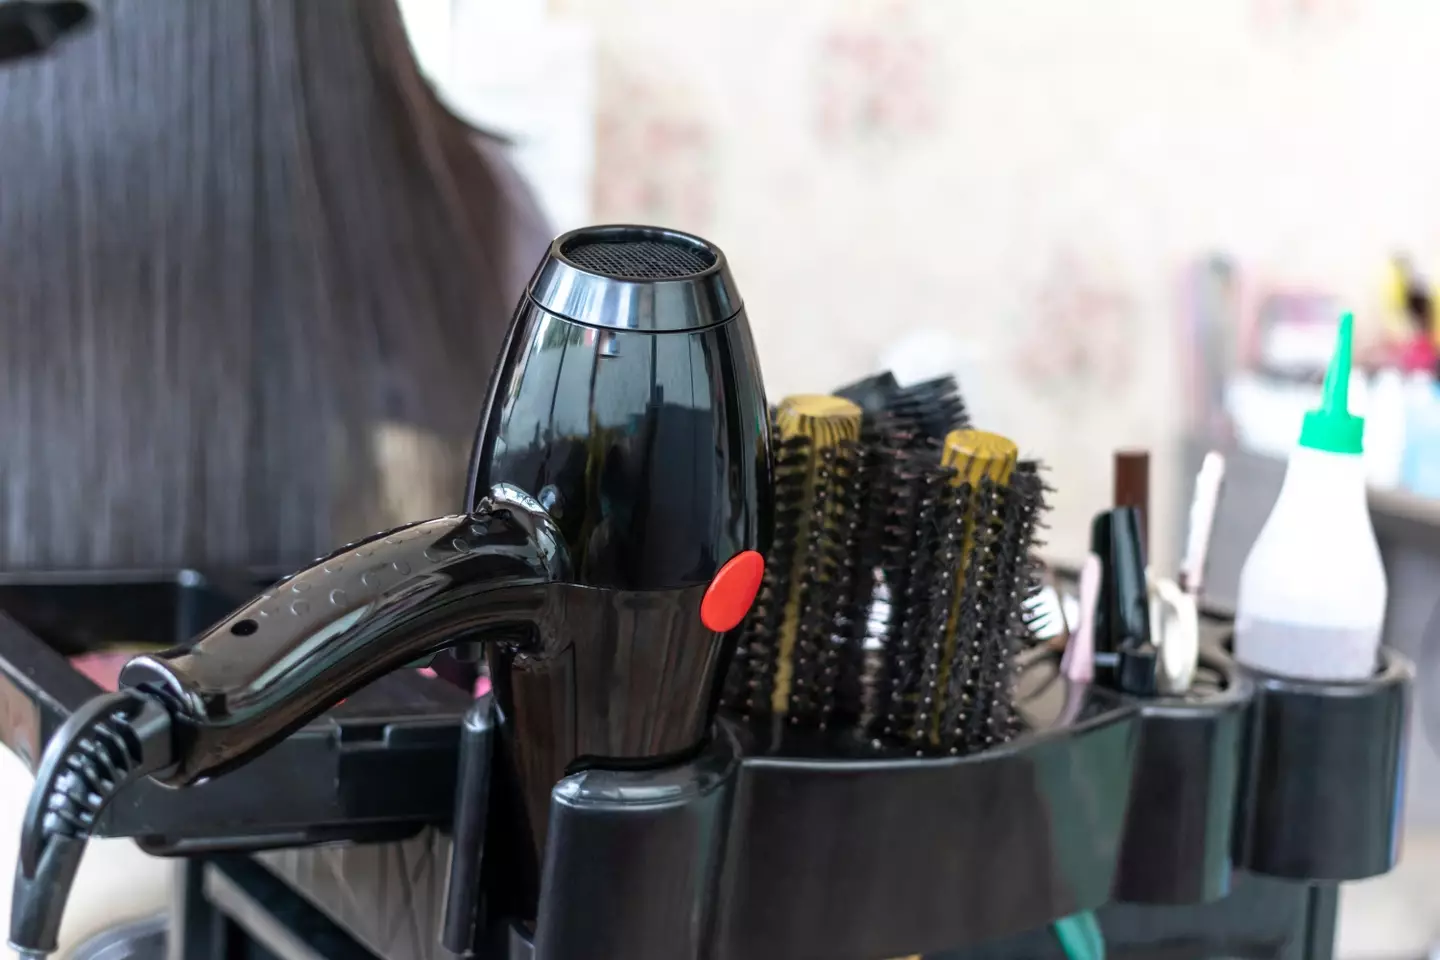 Get salon style hair at home.